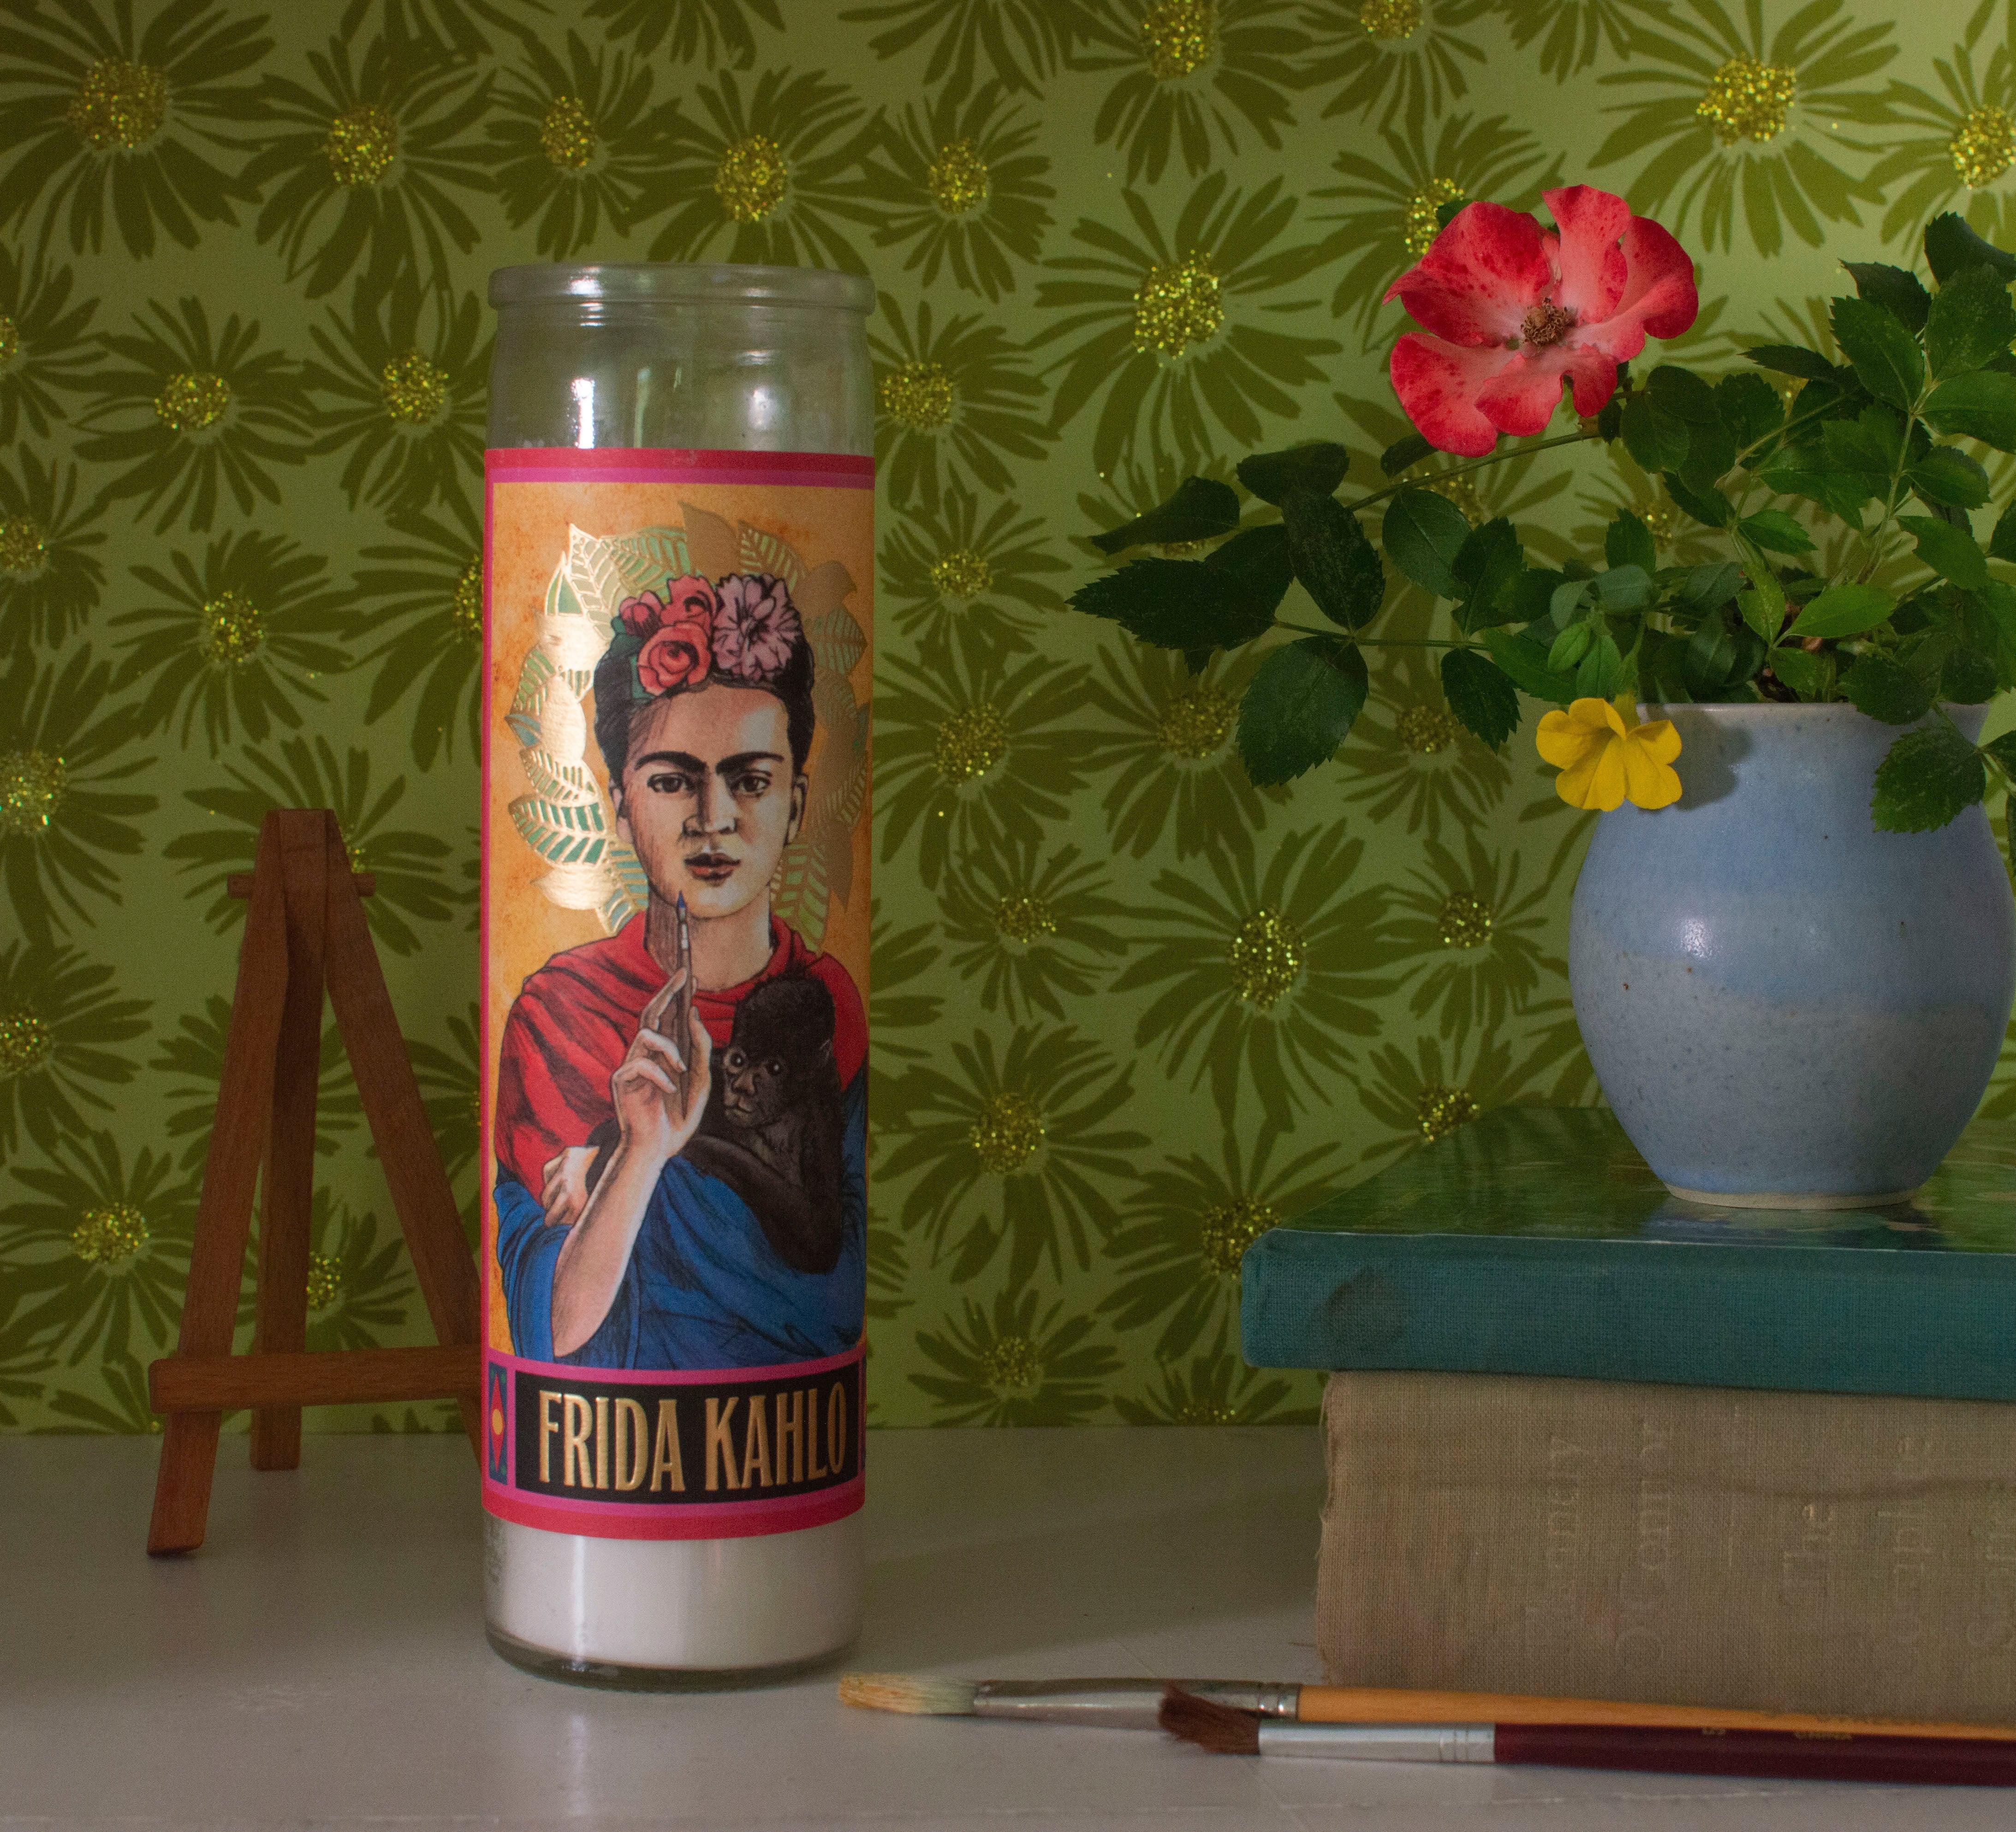 Product photo of Frida Kahlo Secular Saint Candle, a novelty gift manufactured by The Unemployed Philosophers Guild.